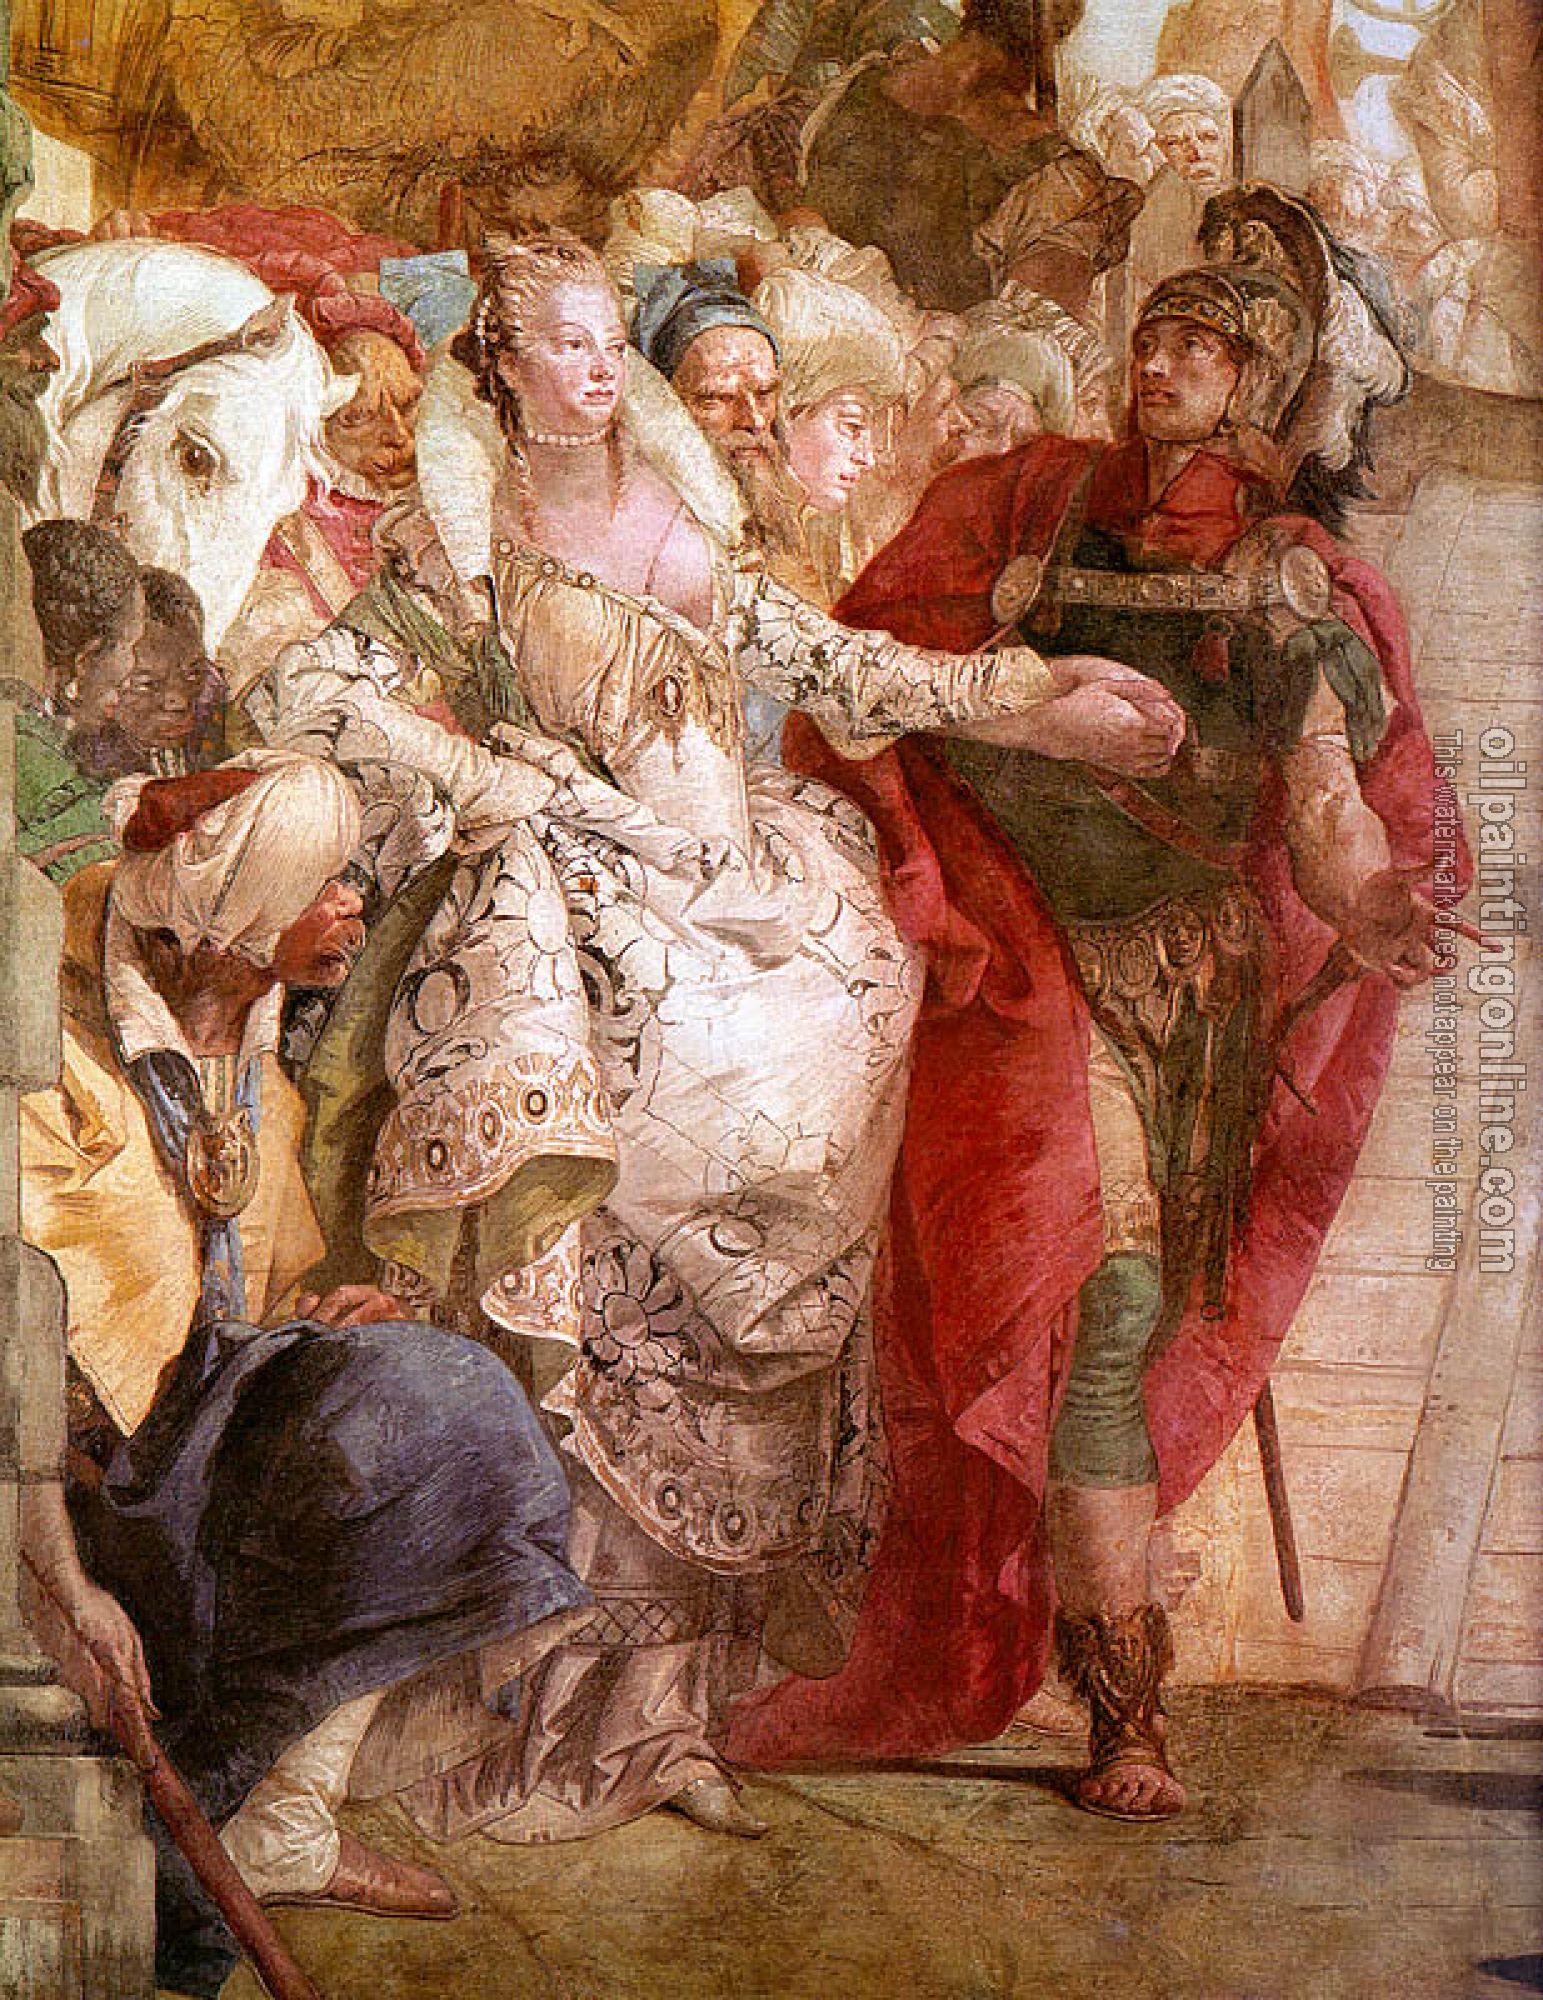 Tiepolo, Giovanni Battista - The Meeting of Anthony and Cleopatra, detail,